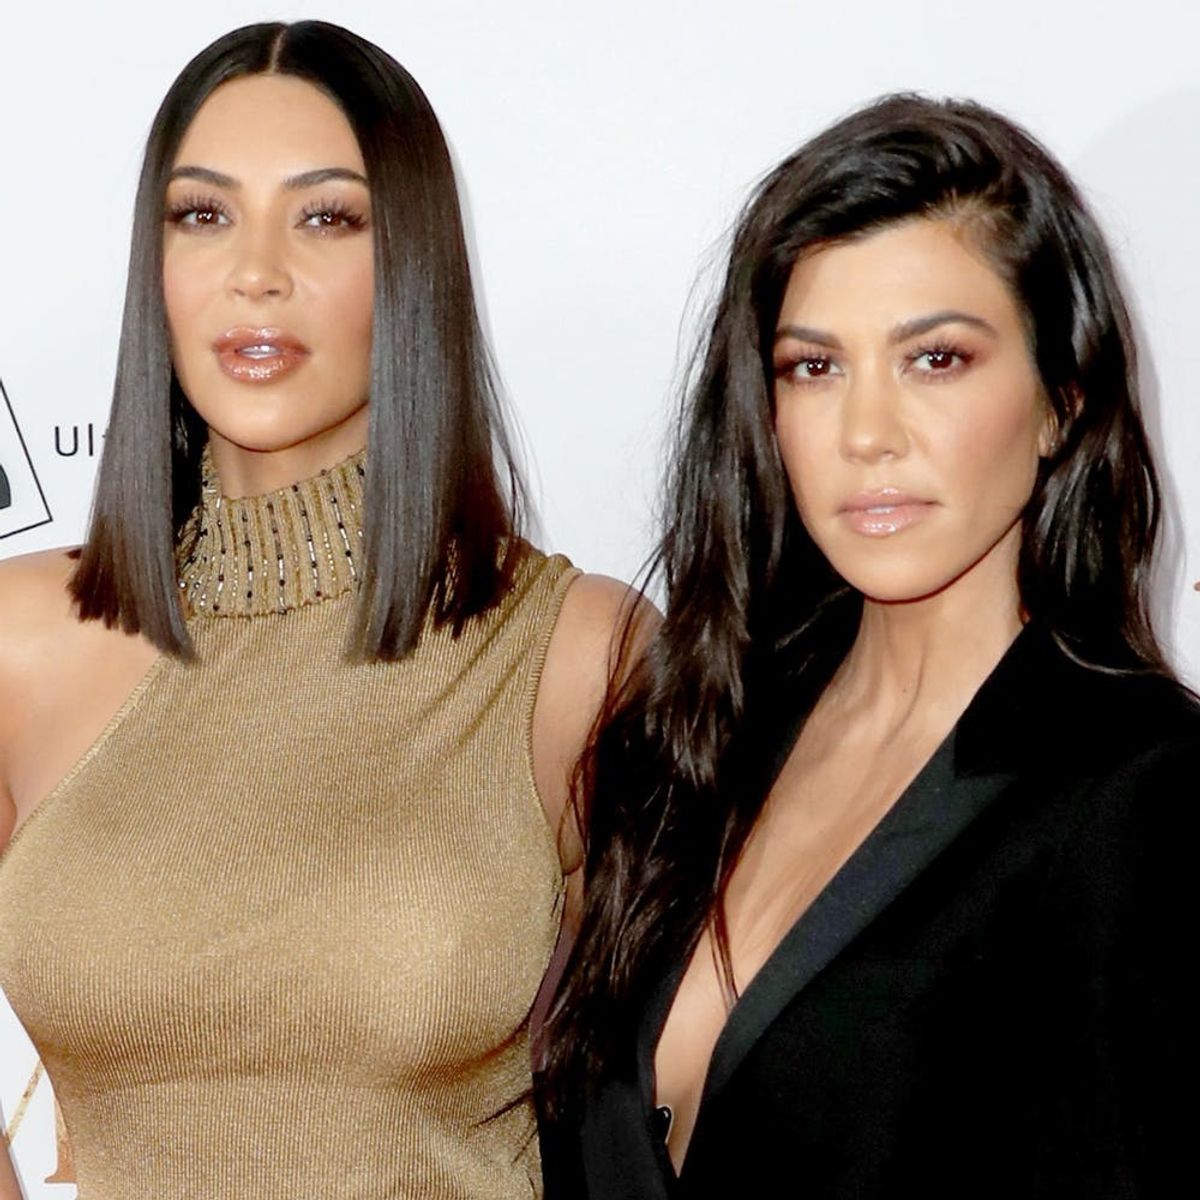 Kim and Kourtney Kardashian Threw the Cutest Monster-Themed Party for Saint and Reign